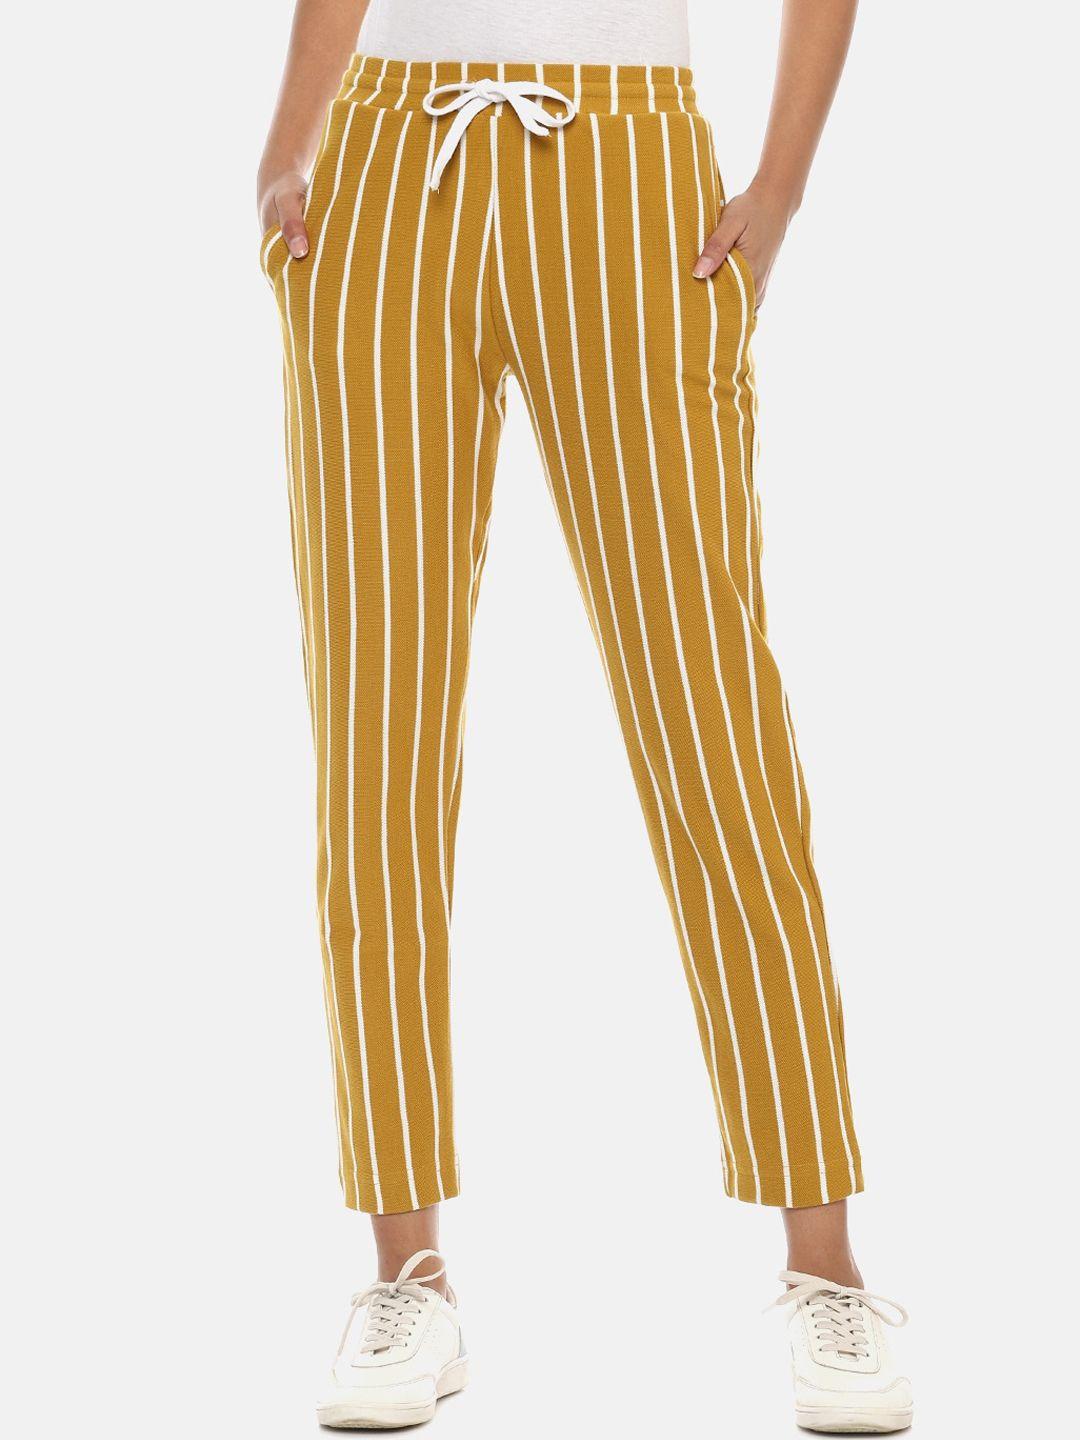 campus sutra women mustard yellow & white striped cotton slim-fit track pants